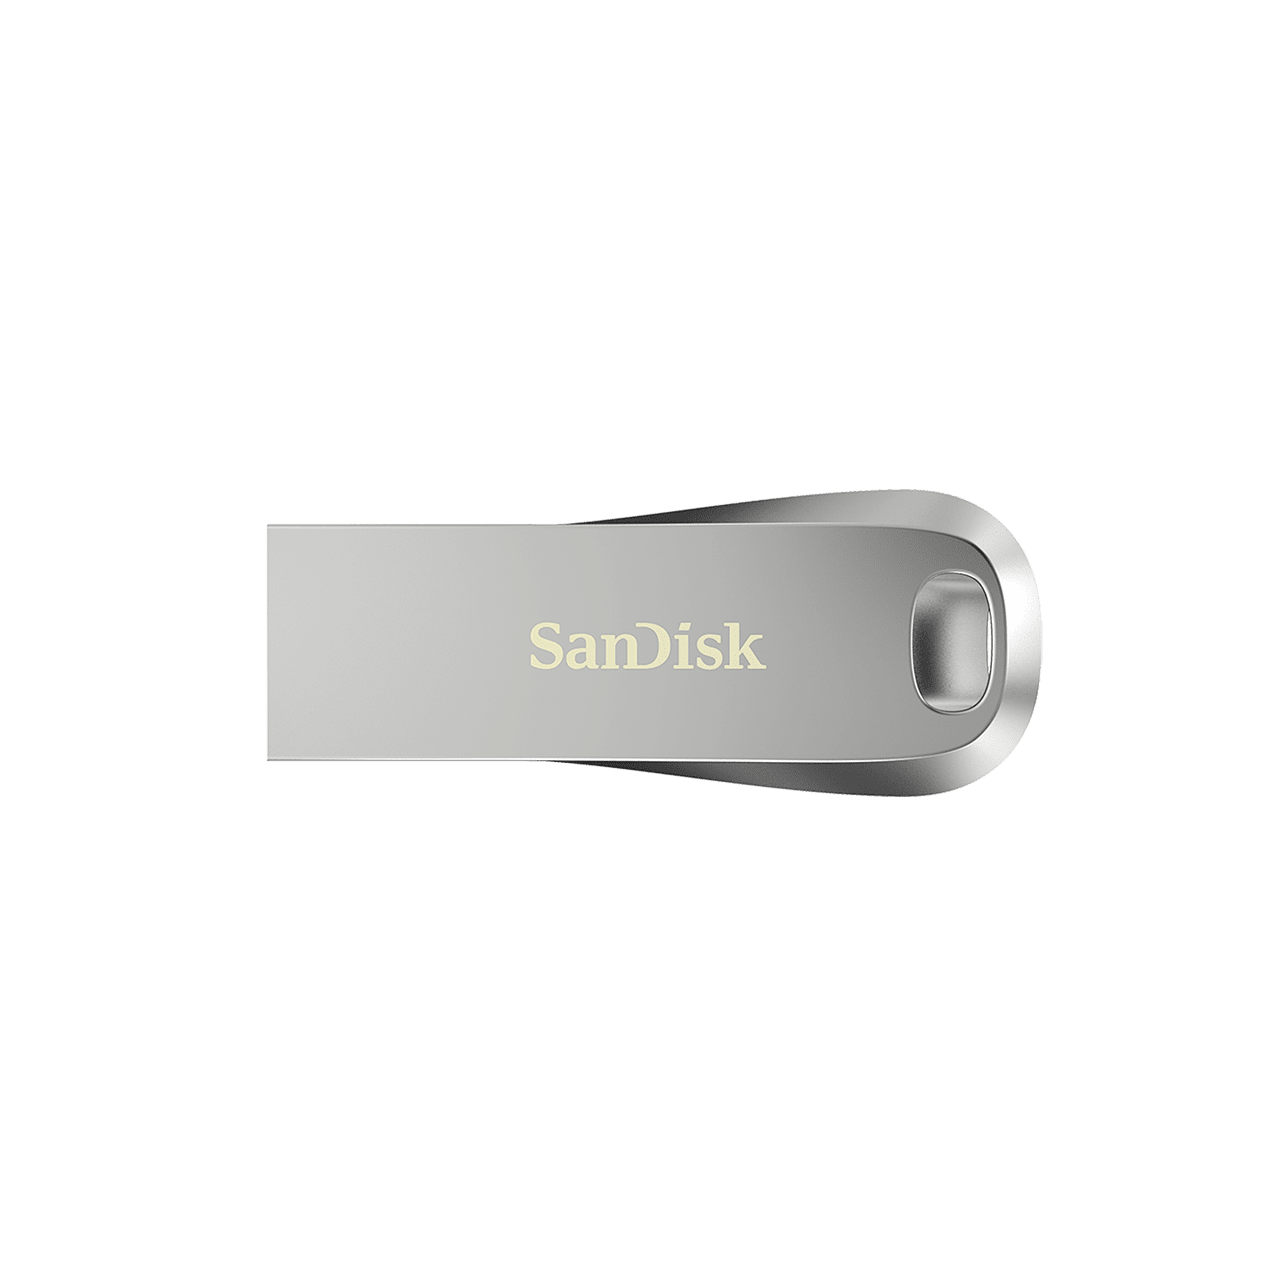 SanDisk Ultra Luxe Cruzer 74 cz74  Flash Drive with USB3.1 High Speed Transfer, Up To 150MB/s, Compact Size, Metal Design, Password Protection, Strap Hole (32GB / 64GB / 128GB / 256GB)